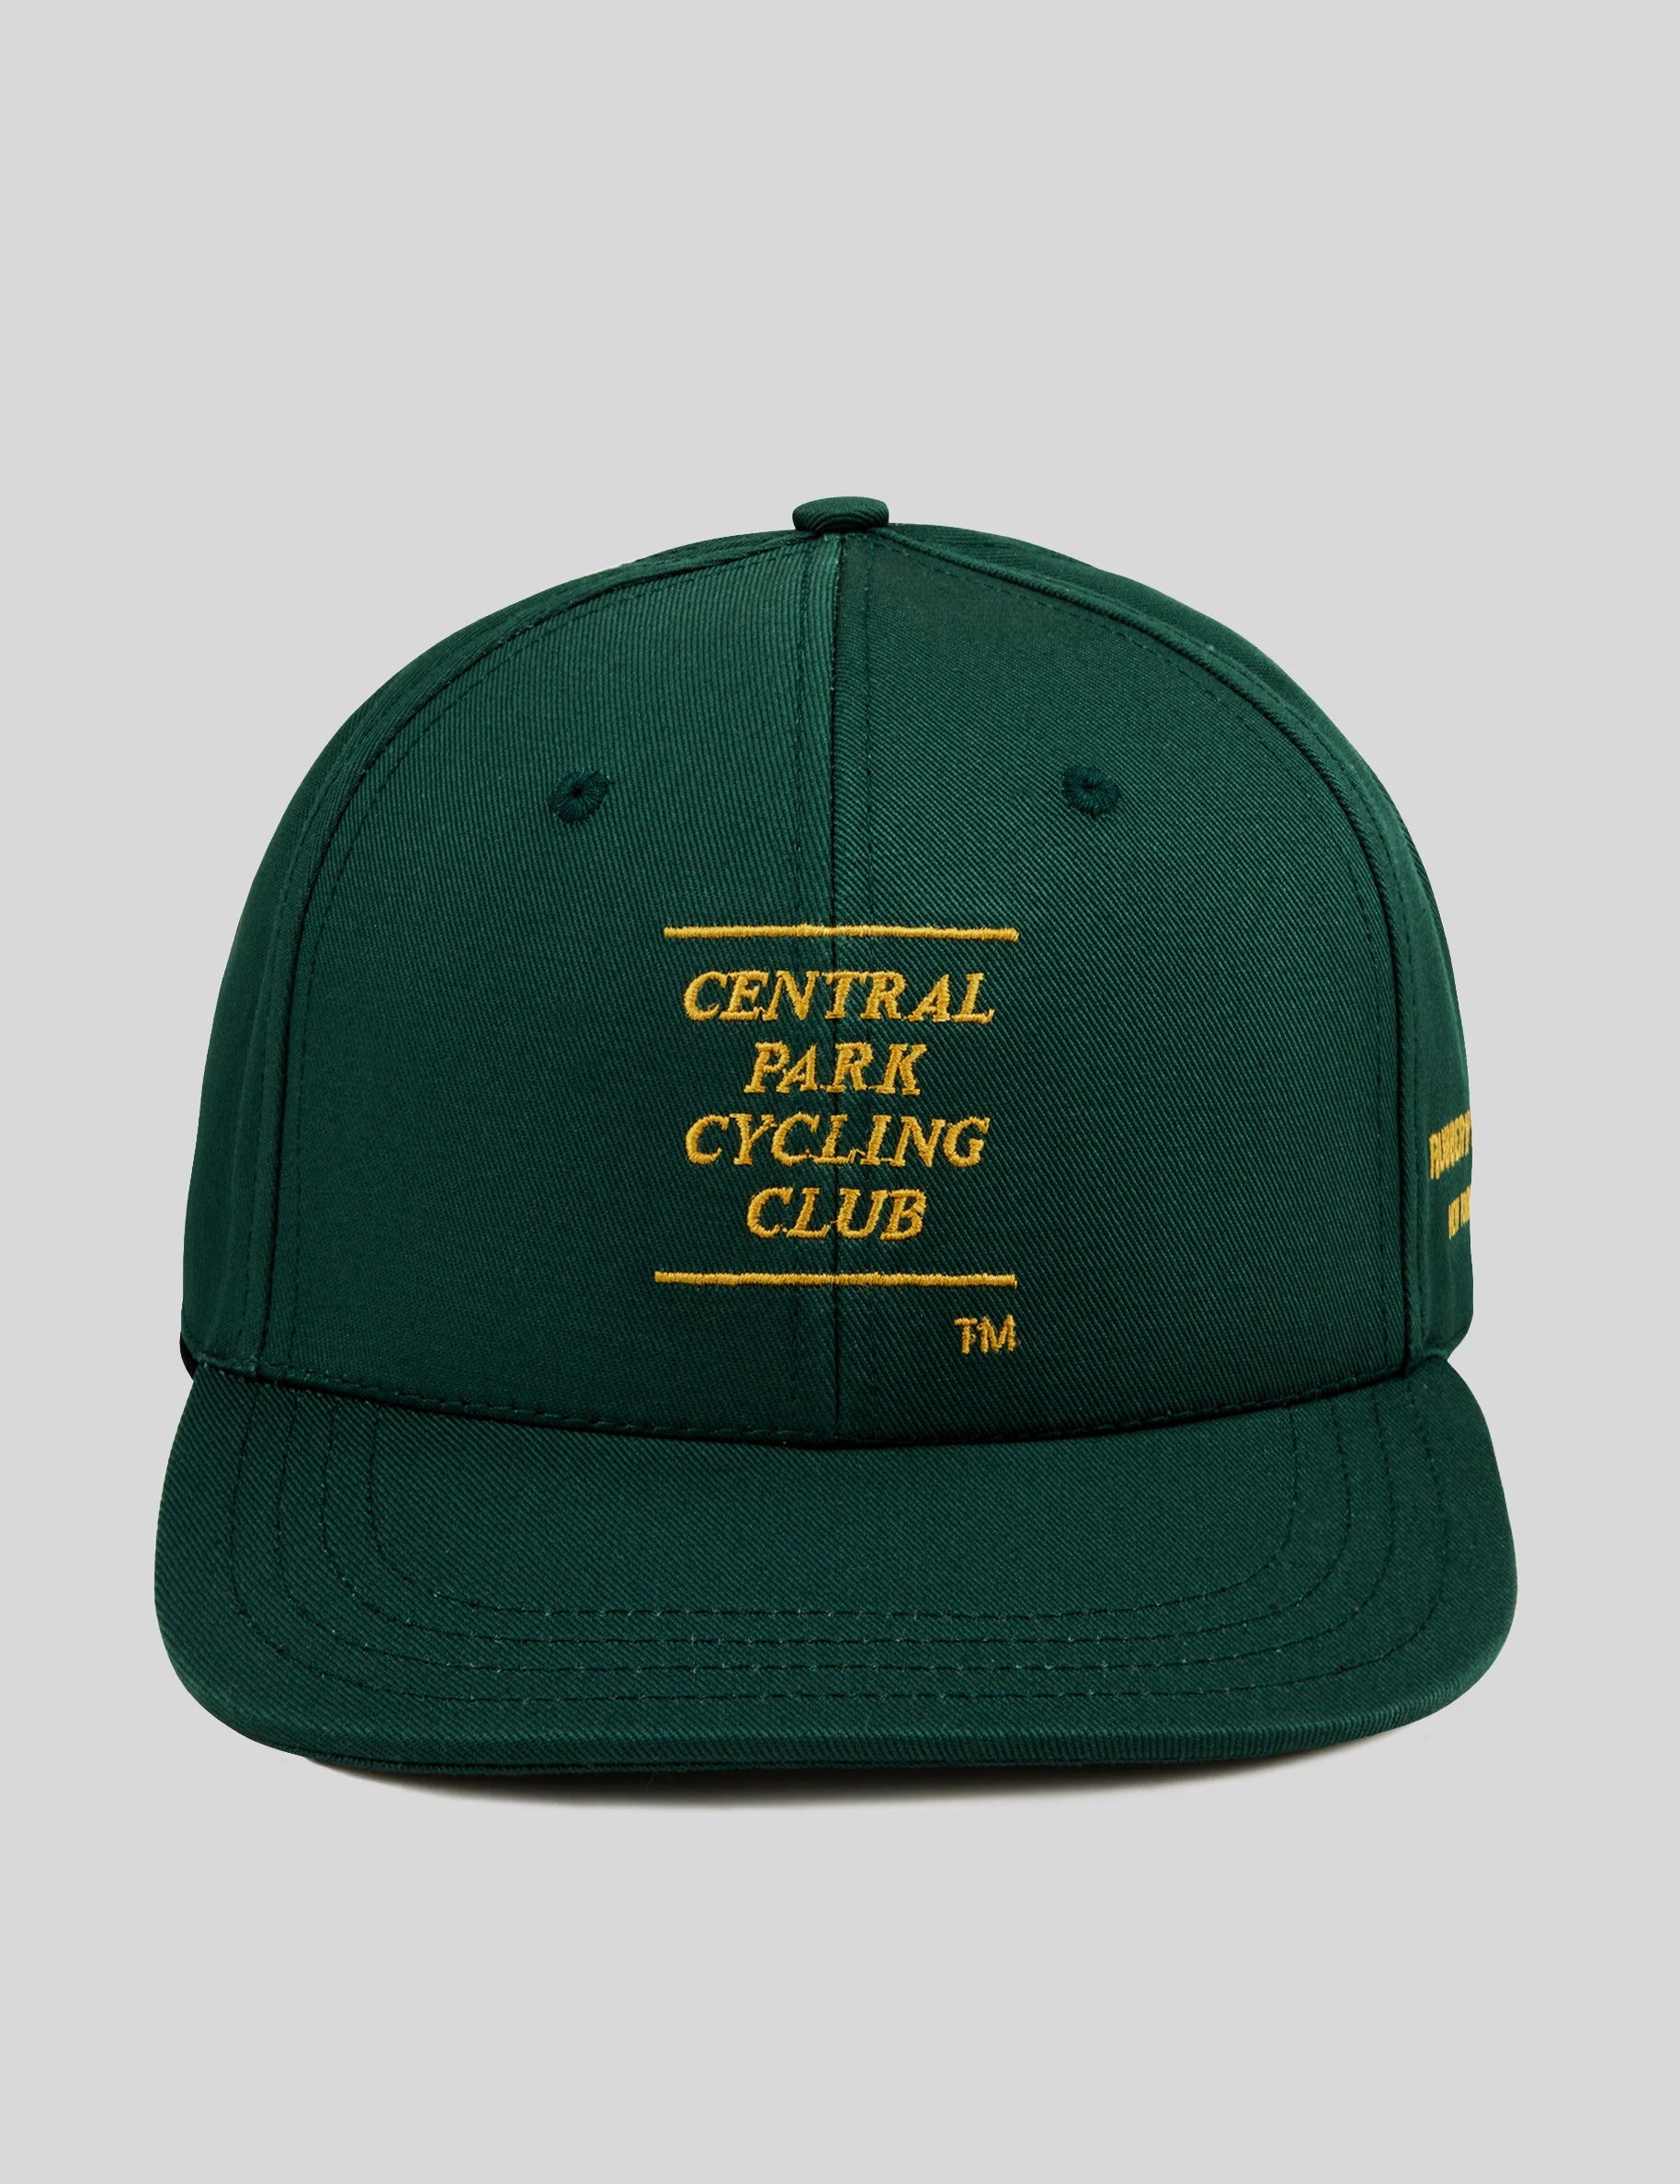 Central Park Cycling Club™  hat made in USA